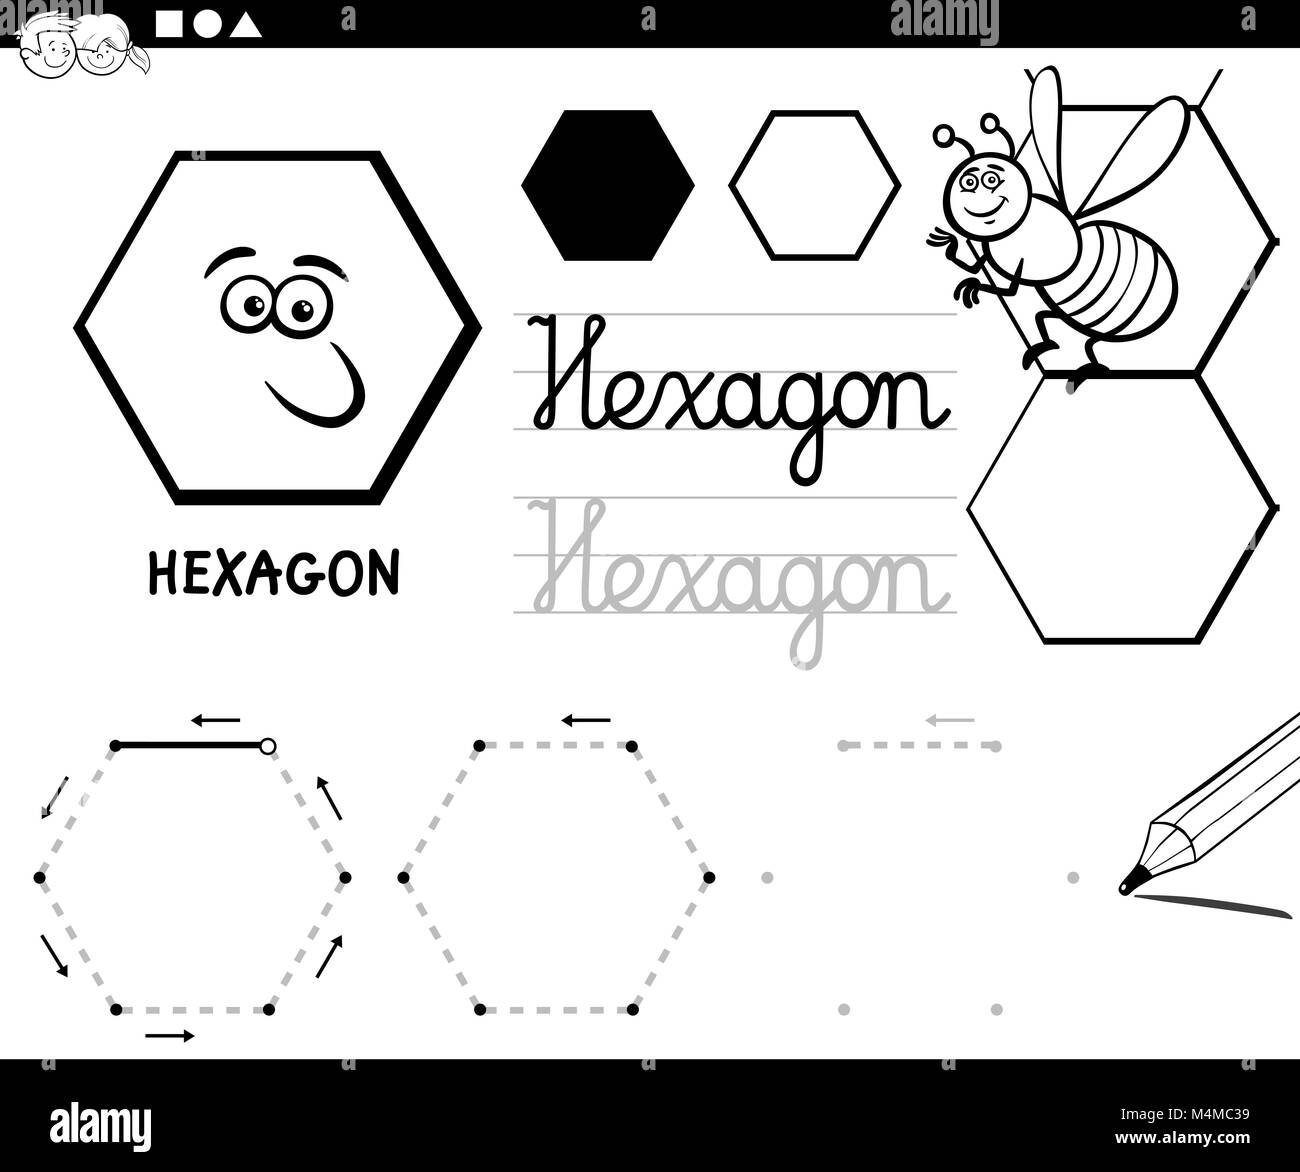 hexagon basic geometric shapes coloring page Stock Photo